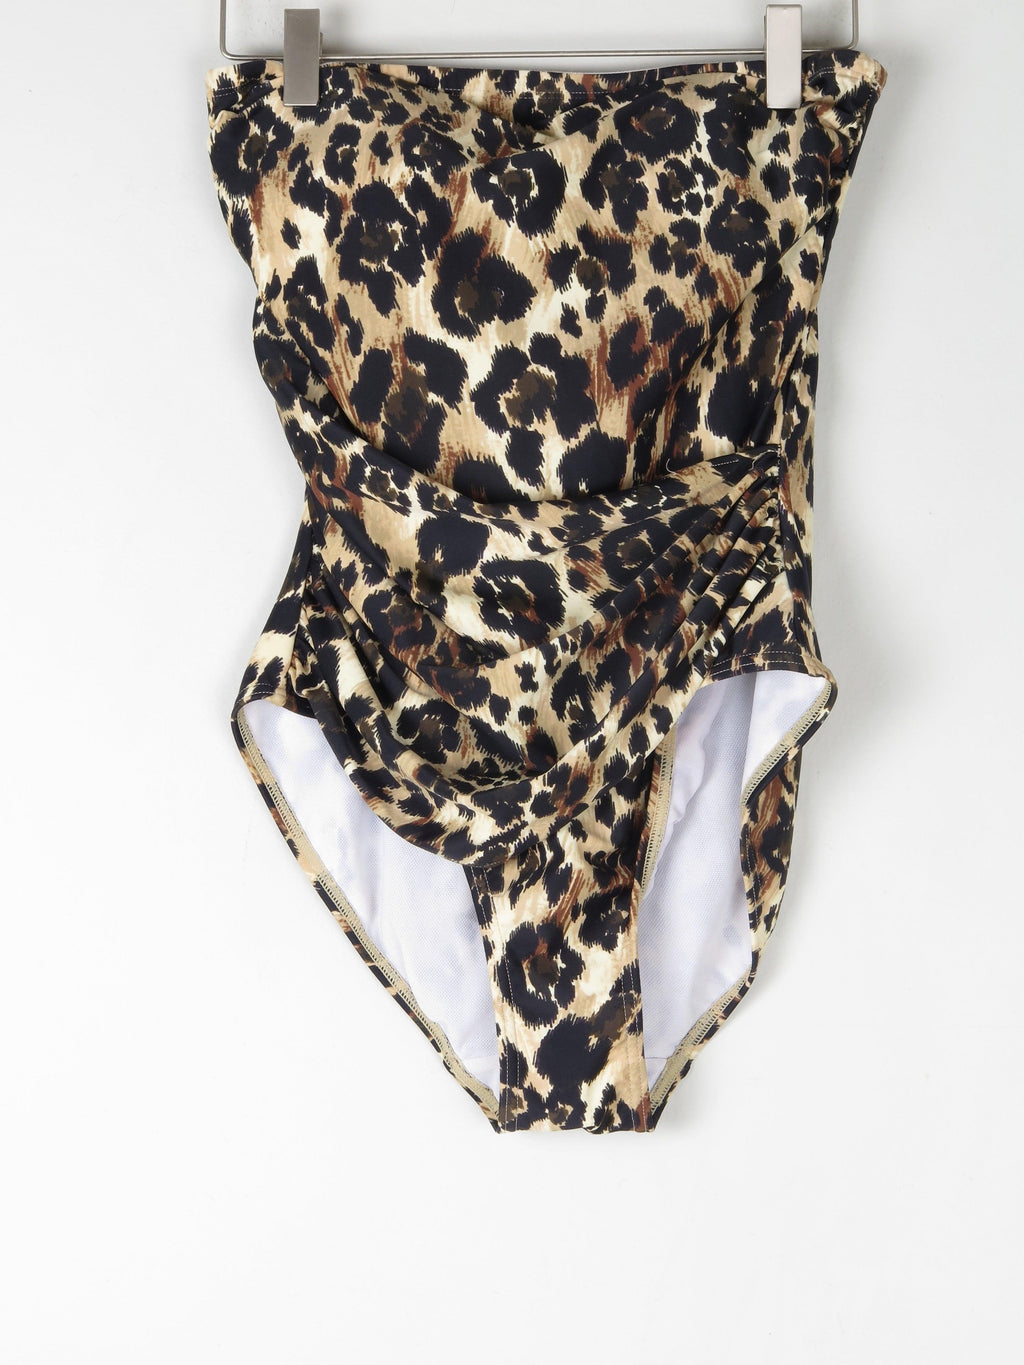 Women’s Vintage Leopard Print Strapless Swimsuit 8/10 Approx - The Harlequin